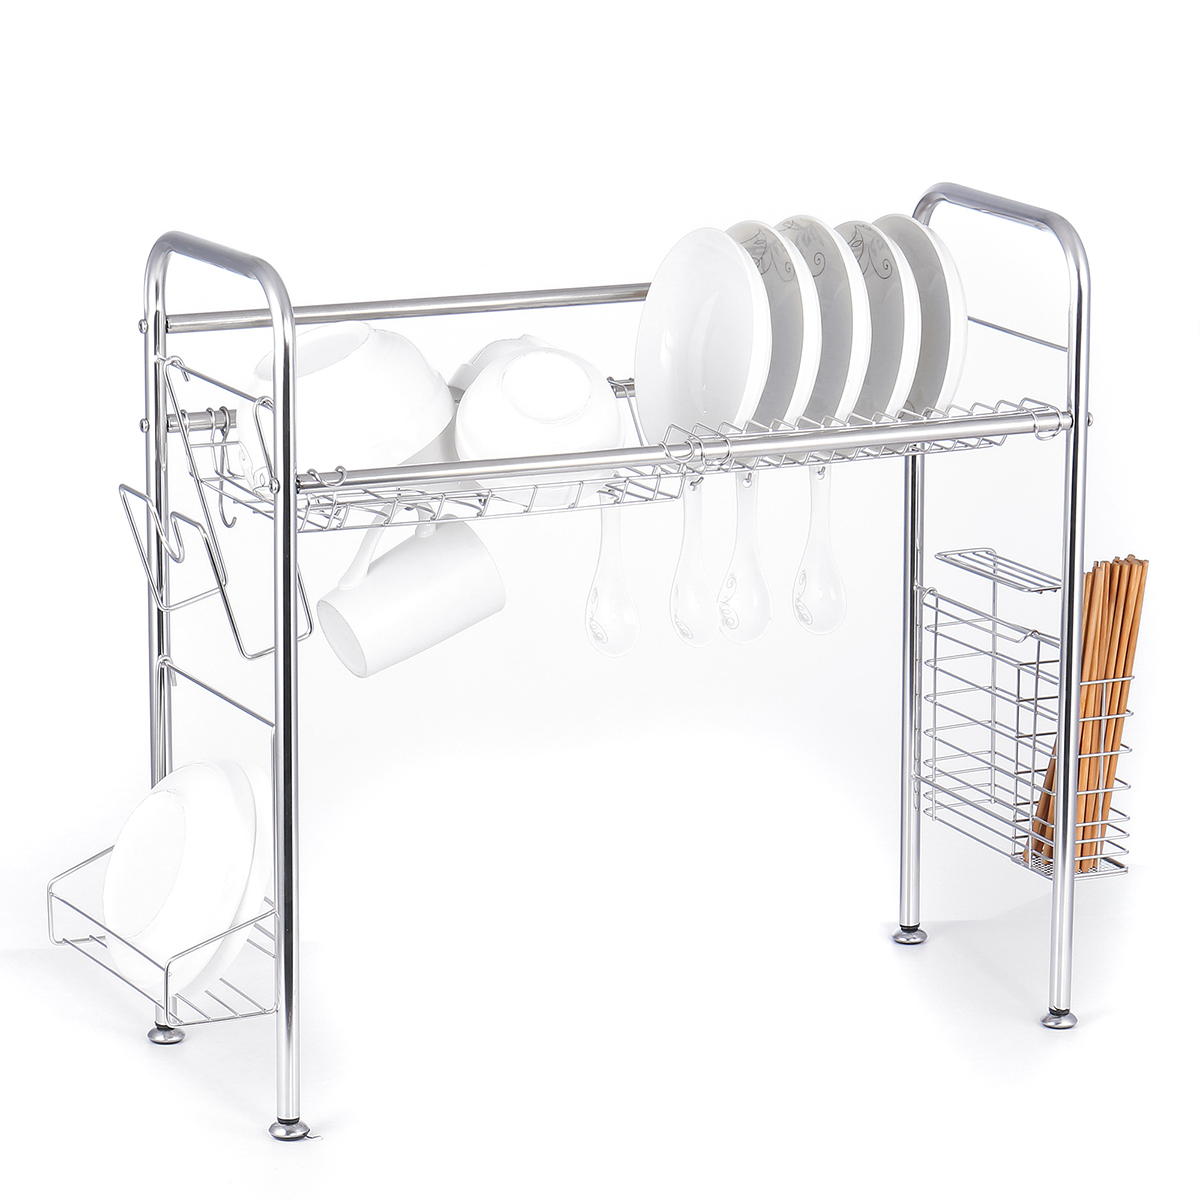 647484cm-Double-Layer-Stainless-Steel-Rack-Shelf-Storage-for-Kitchen-Dishes-Arrangement-1671407-5